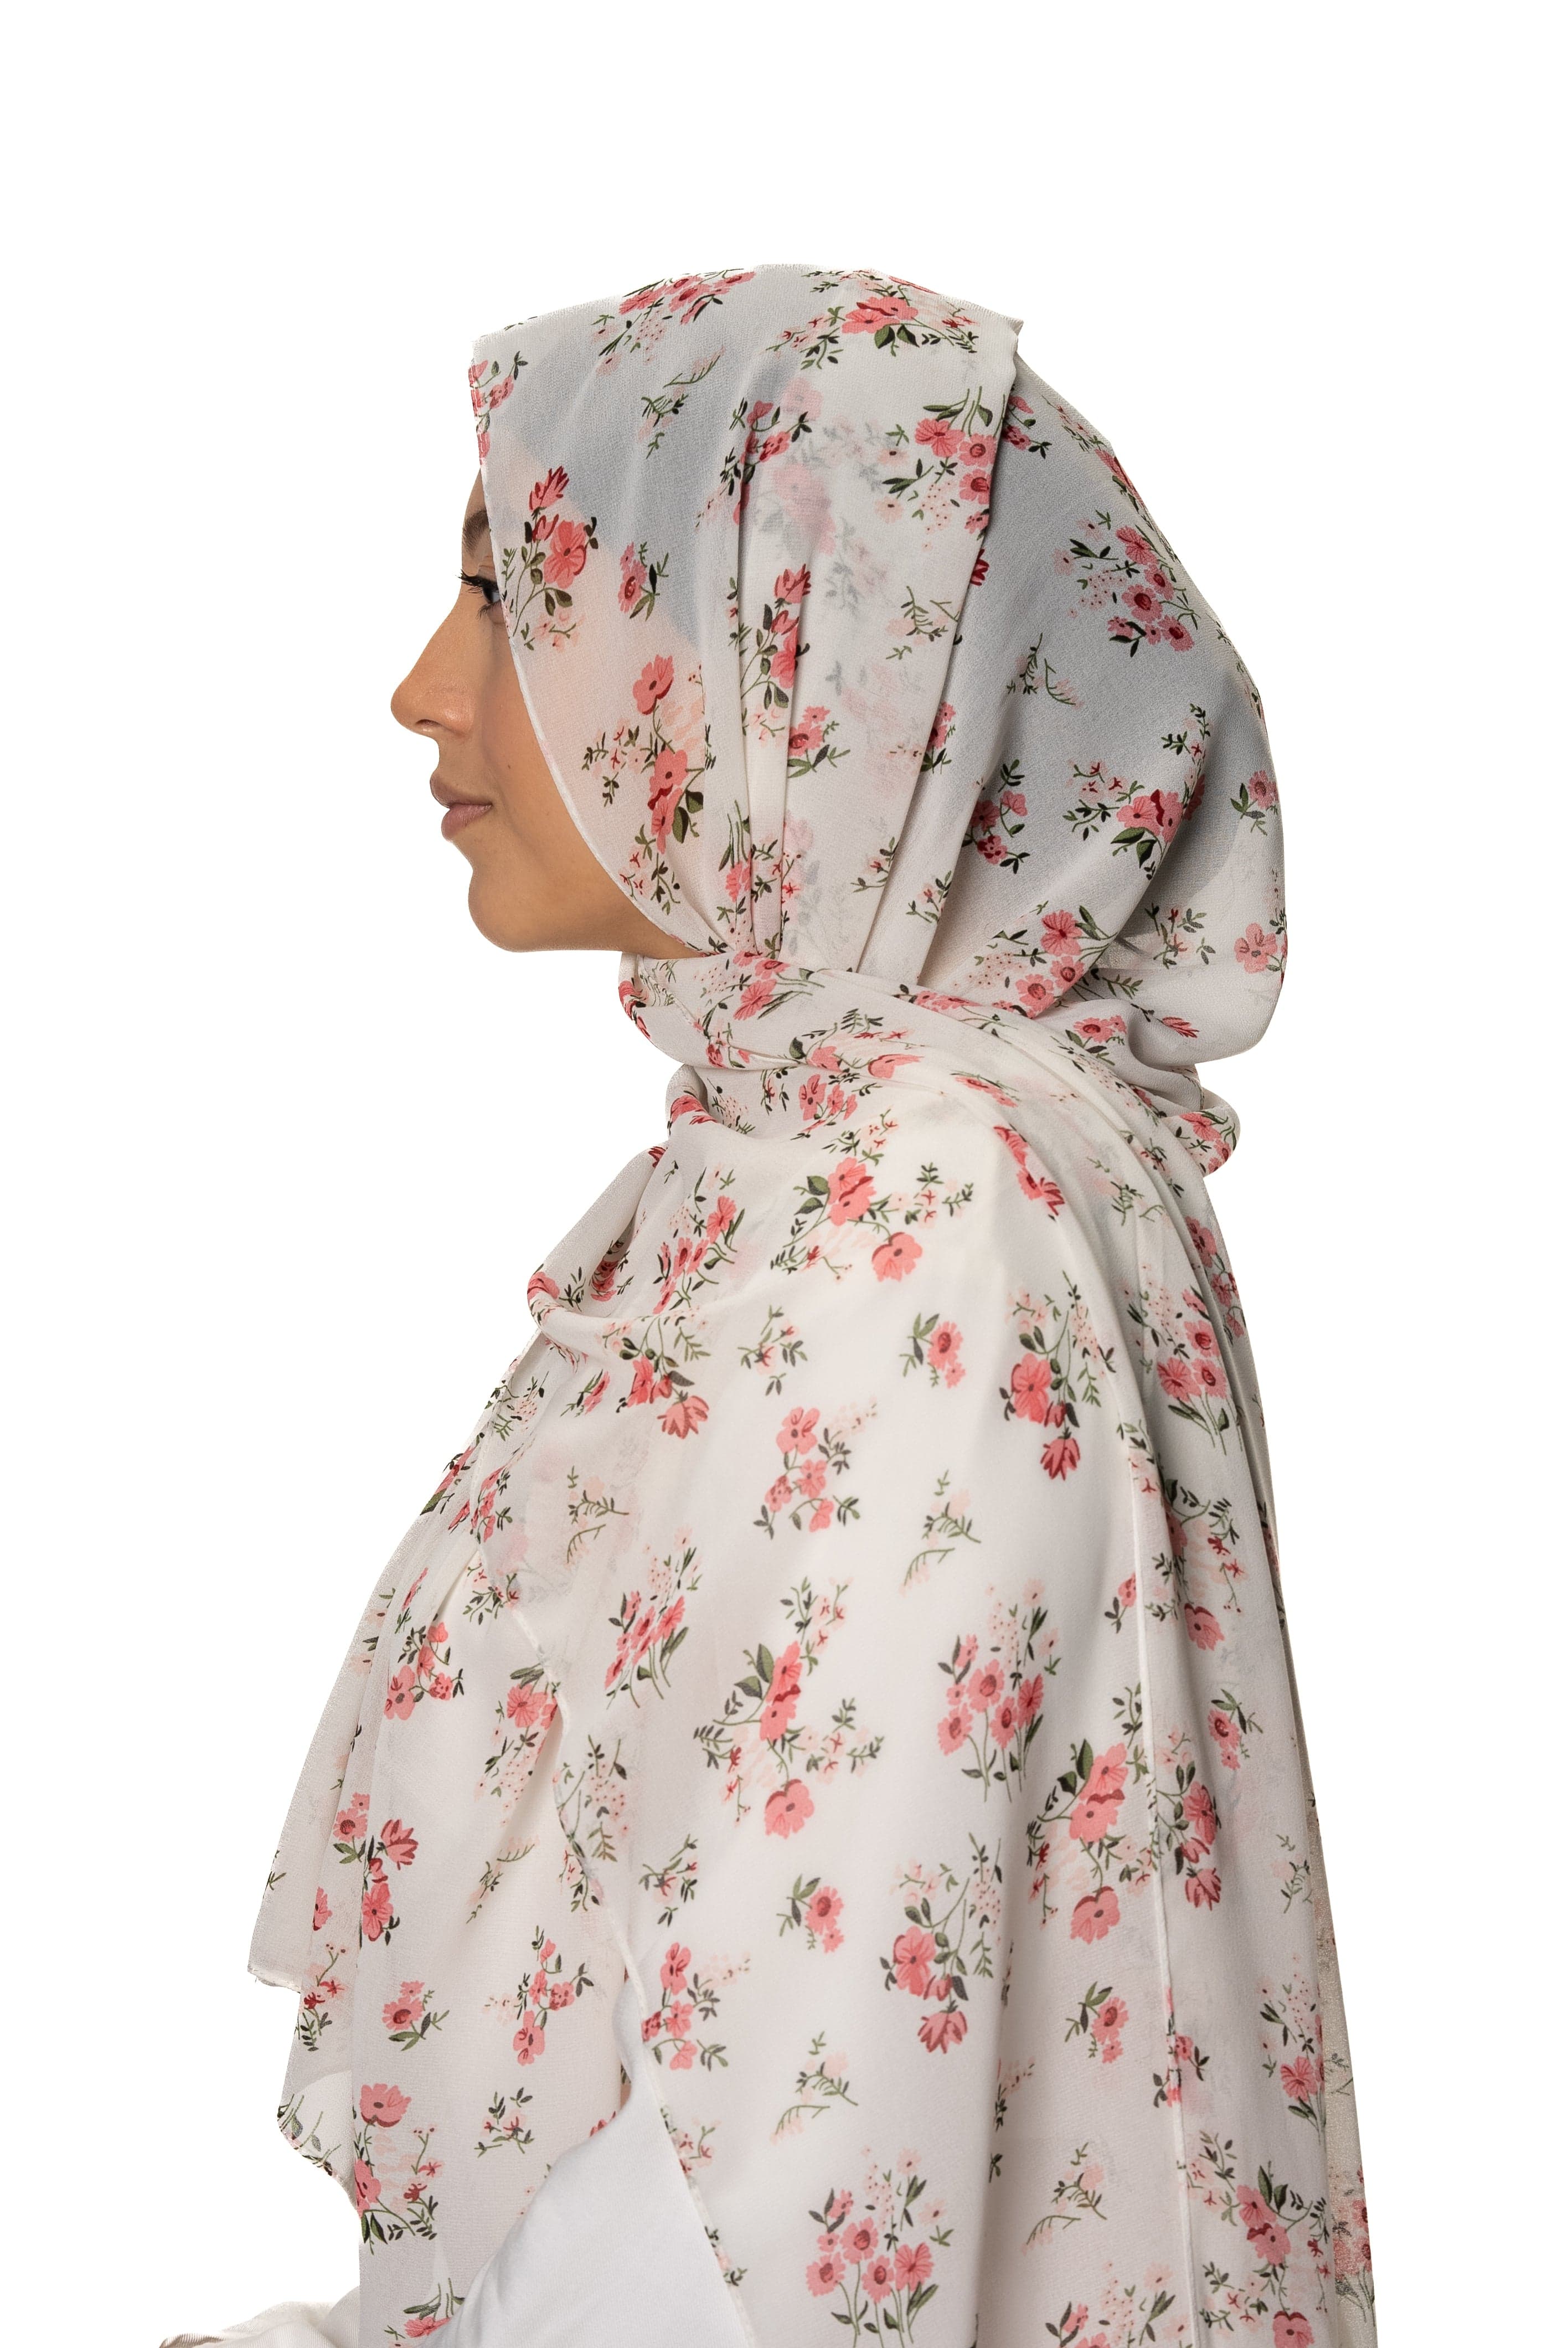 Jolie Nisa Hijab Elevate Your Style with Jolie Nisa Non-Slip Printed Chiffon Hijabs - Elegant, Comfortable, and Secure Hijabs for Women  Jolie Nisa Non-Slip Printed Chiffon Hijabs - Elegant, Comfortable 